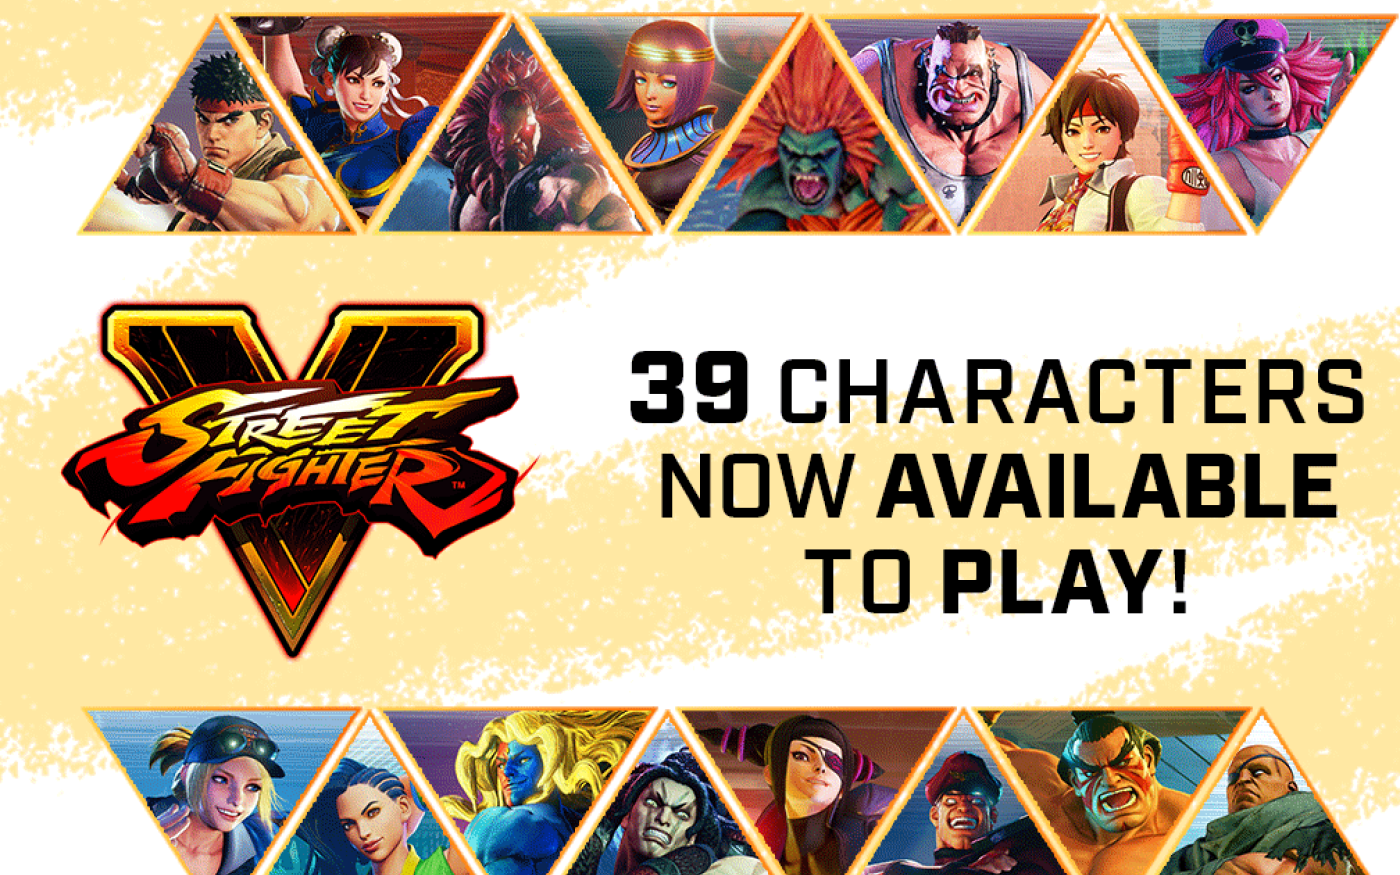 Street Fighter V is free until February 9